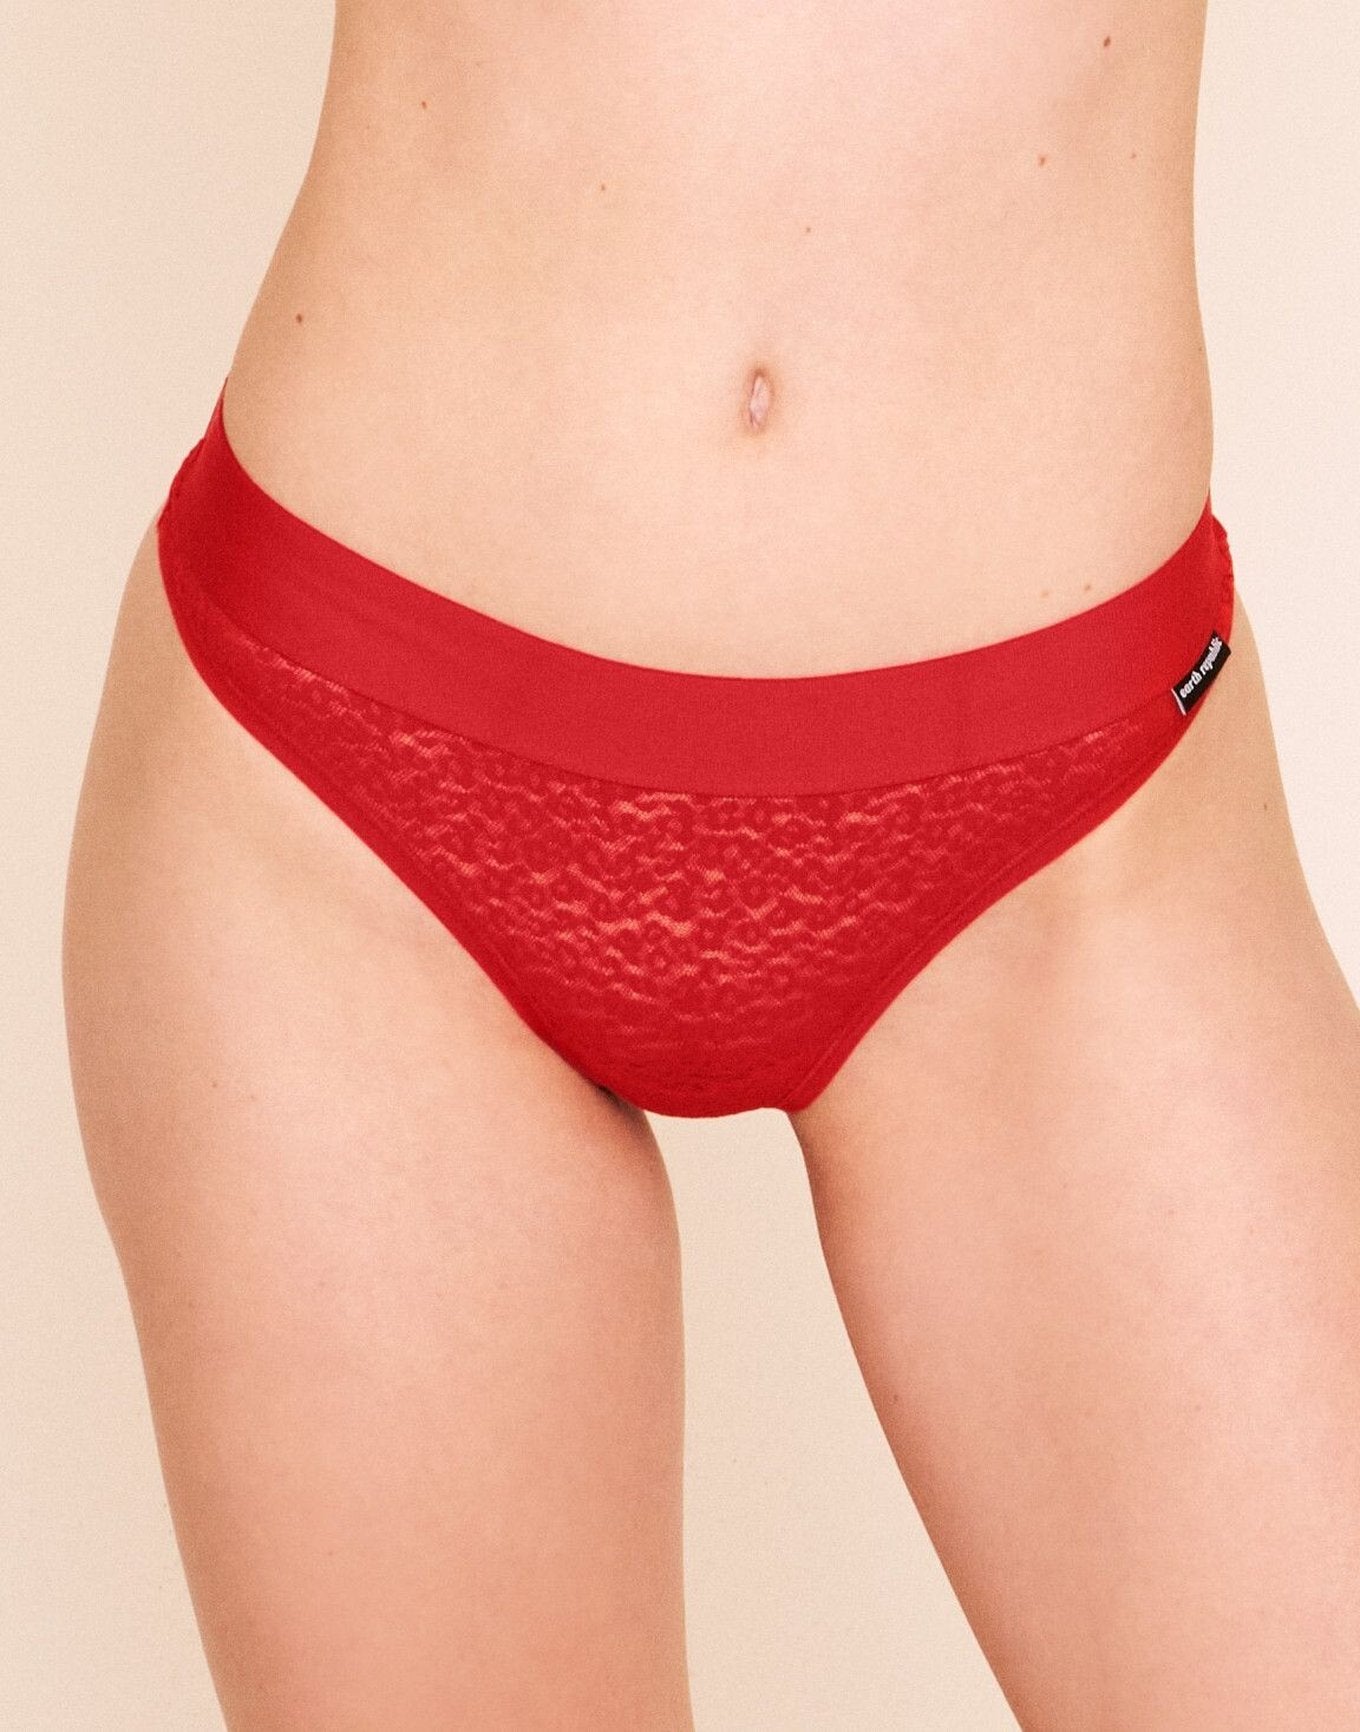 Earth Republic Ariya Lace Lace Thong in color Flame Scarlet and shape thong